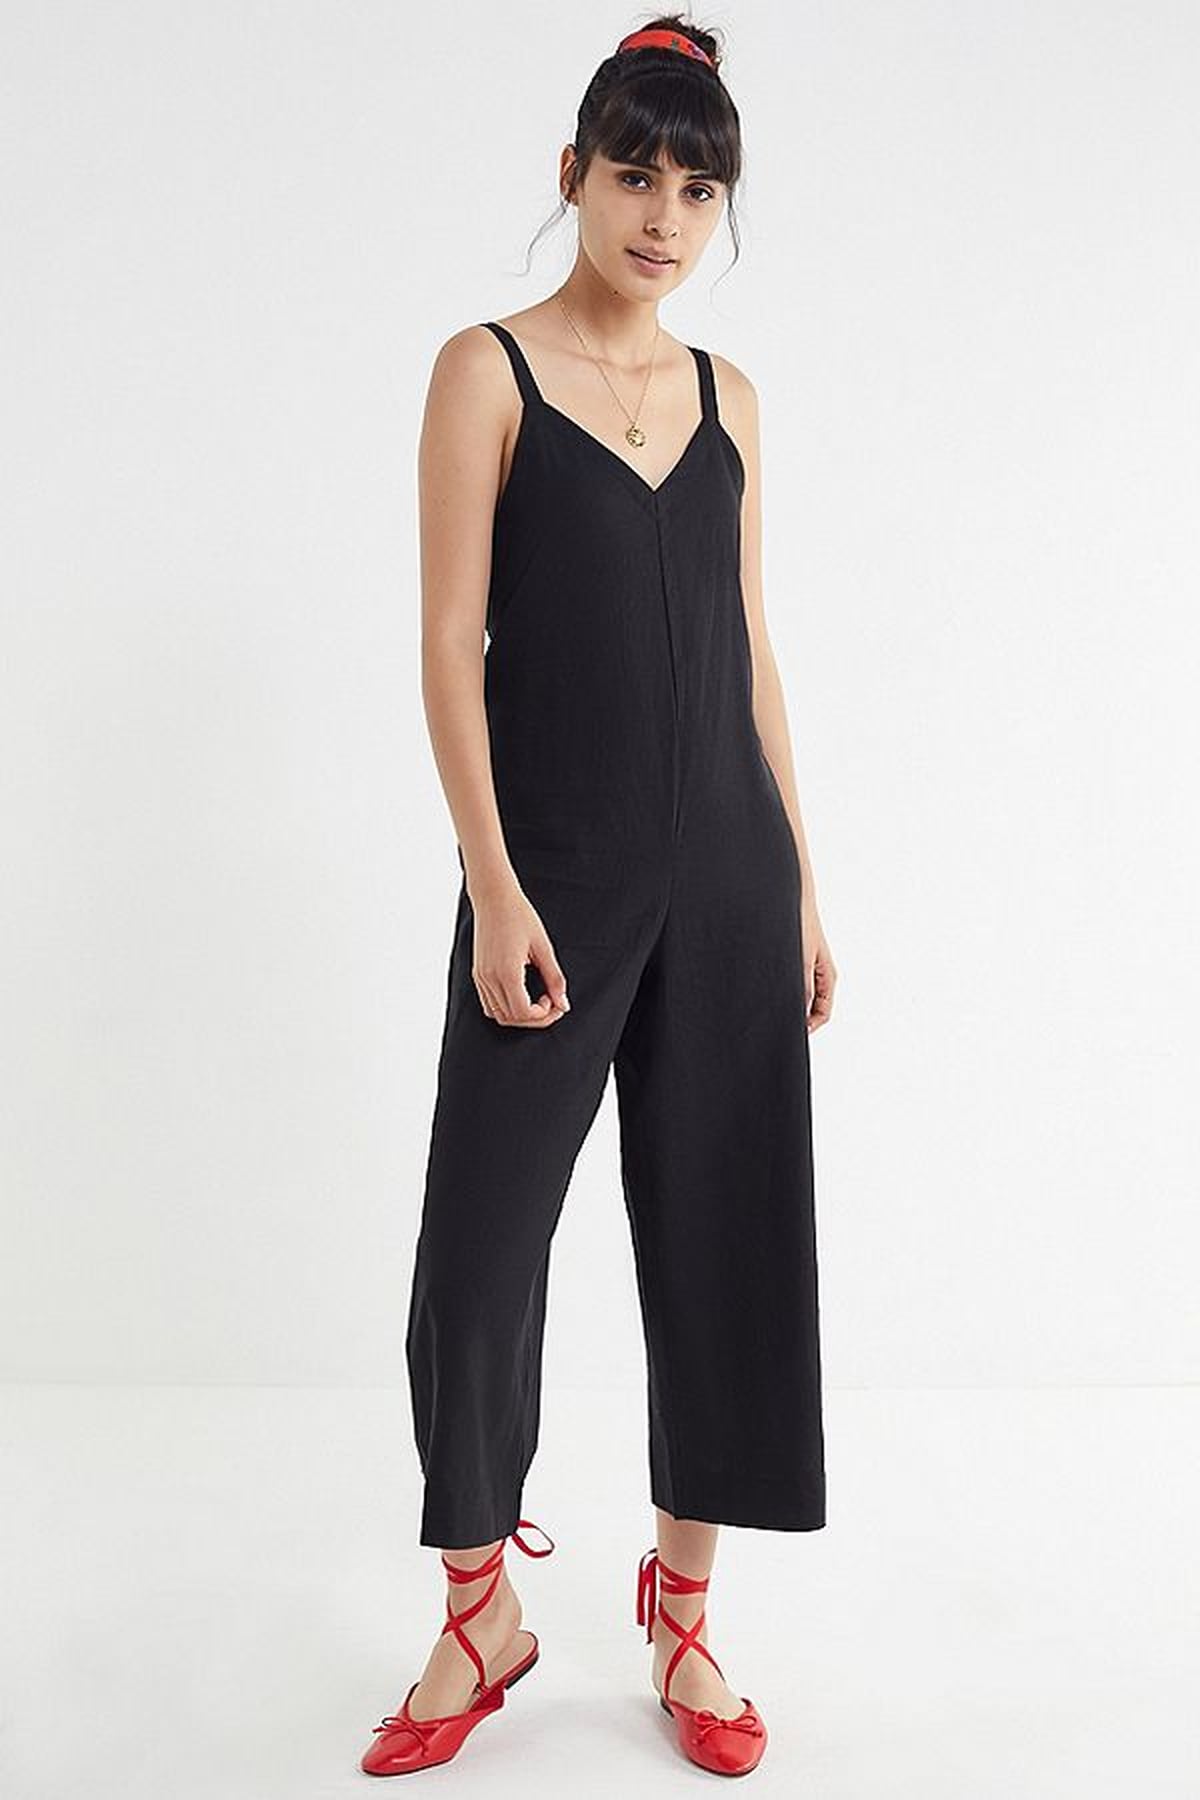 Comfortable Jumpsuits From Urban Outfitters | POPSUGAR Fashion